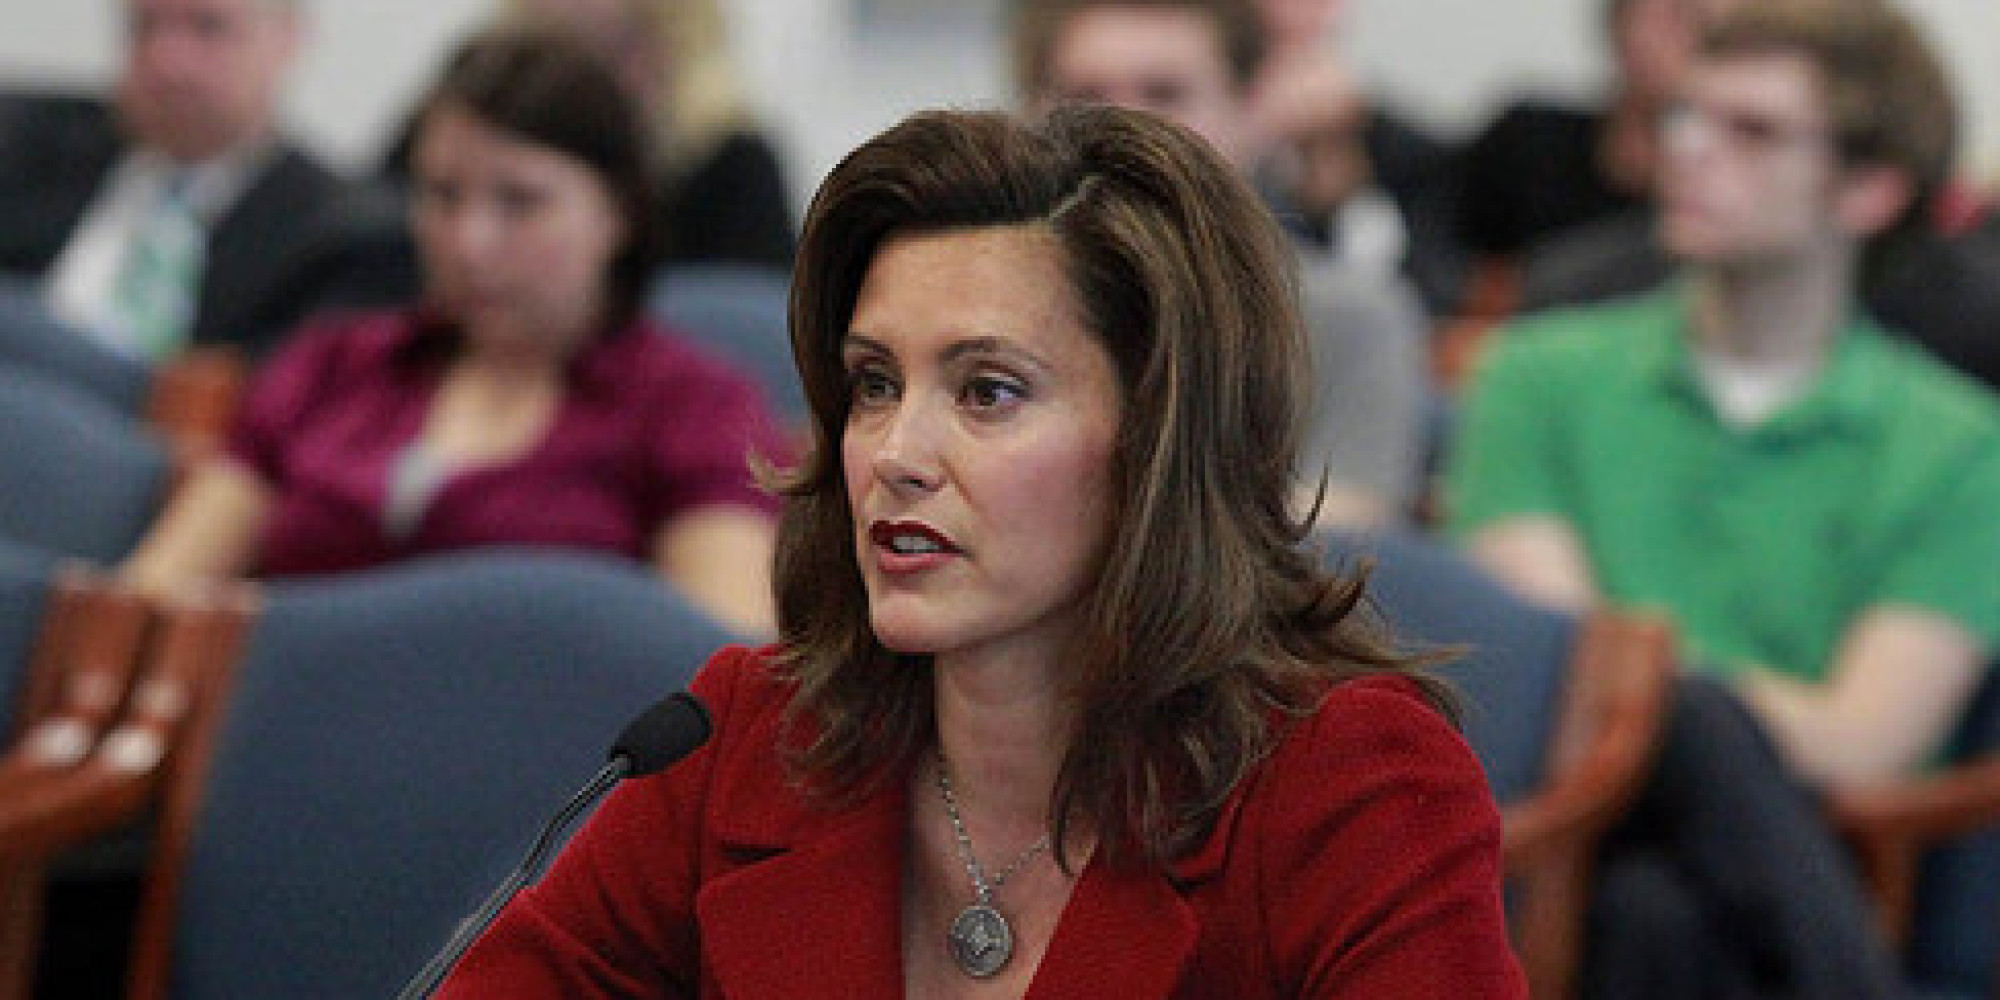 Lawmaker Bravely Reveals She Was Victim Of Rape In Emotional 'Abortion Insurance ...2000 x 1000